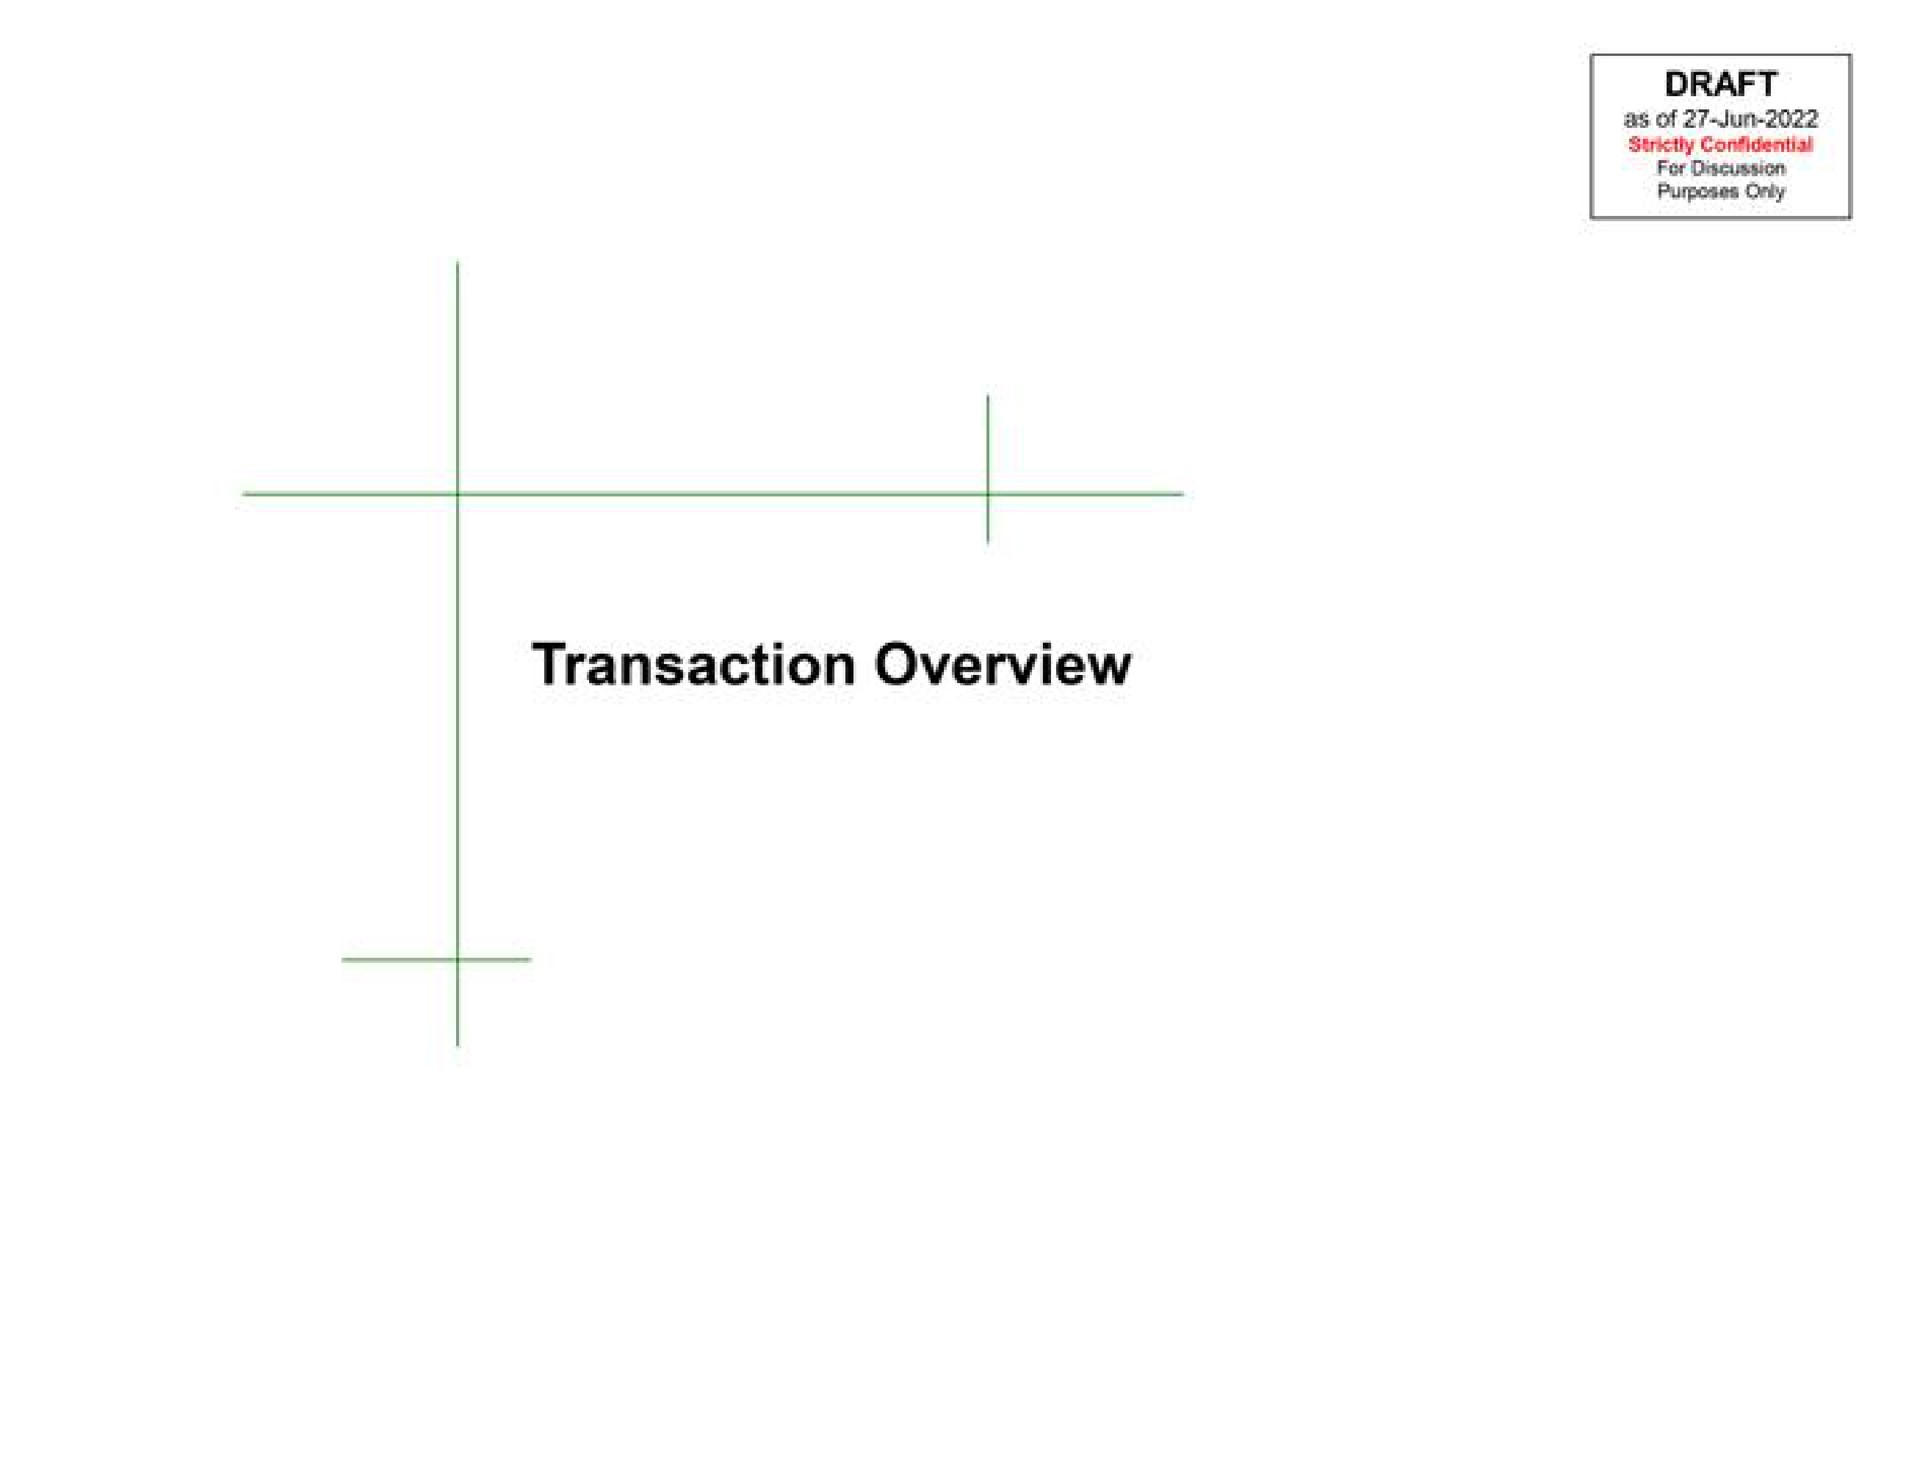 draft as of transaction overview | TD Securities